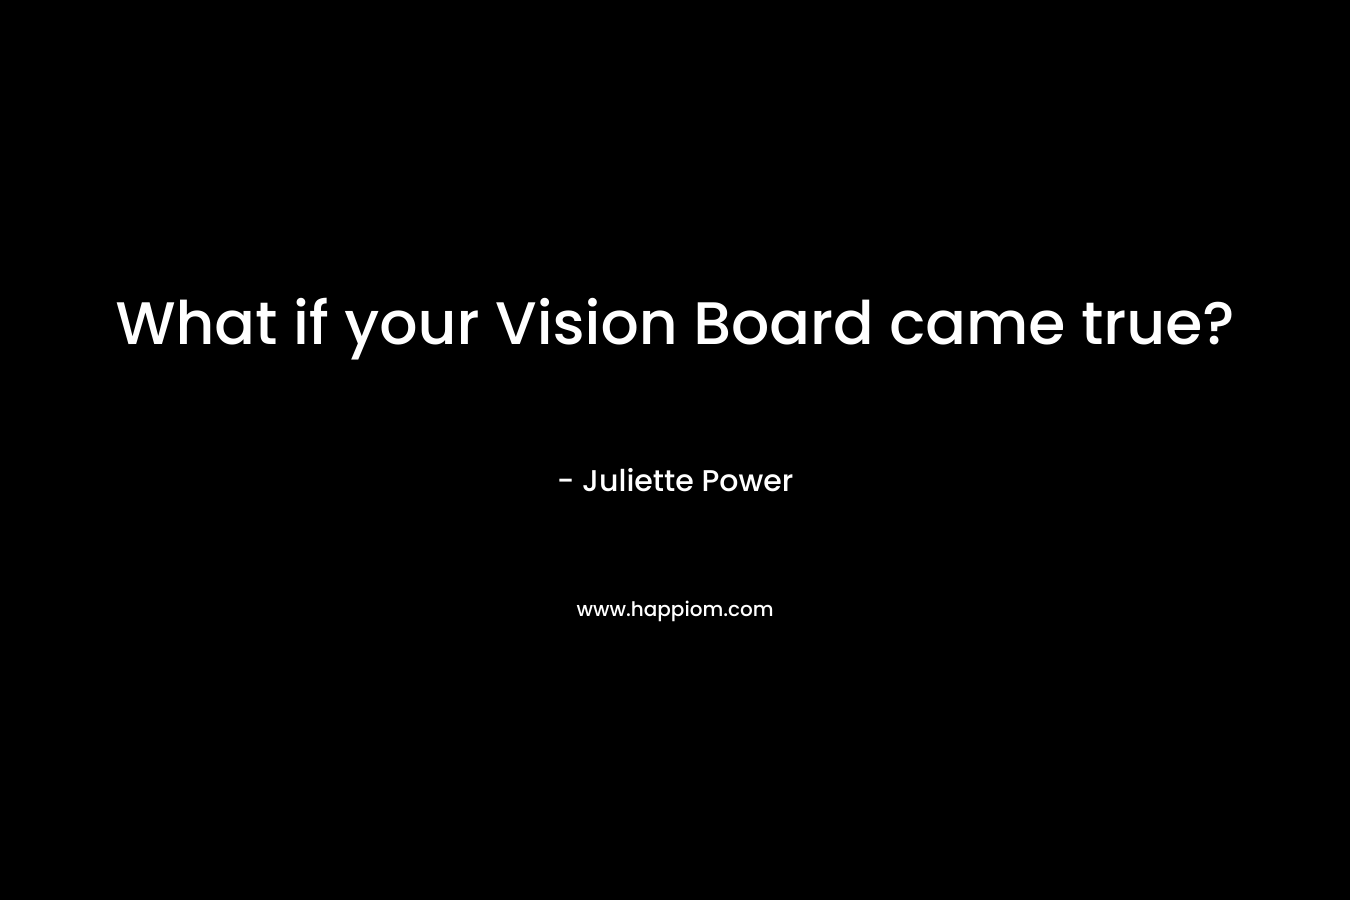 What if your Vision Board came true?